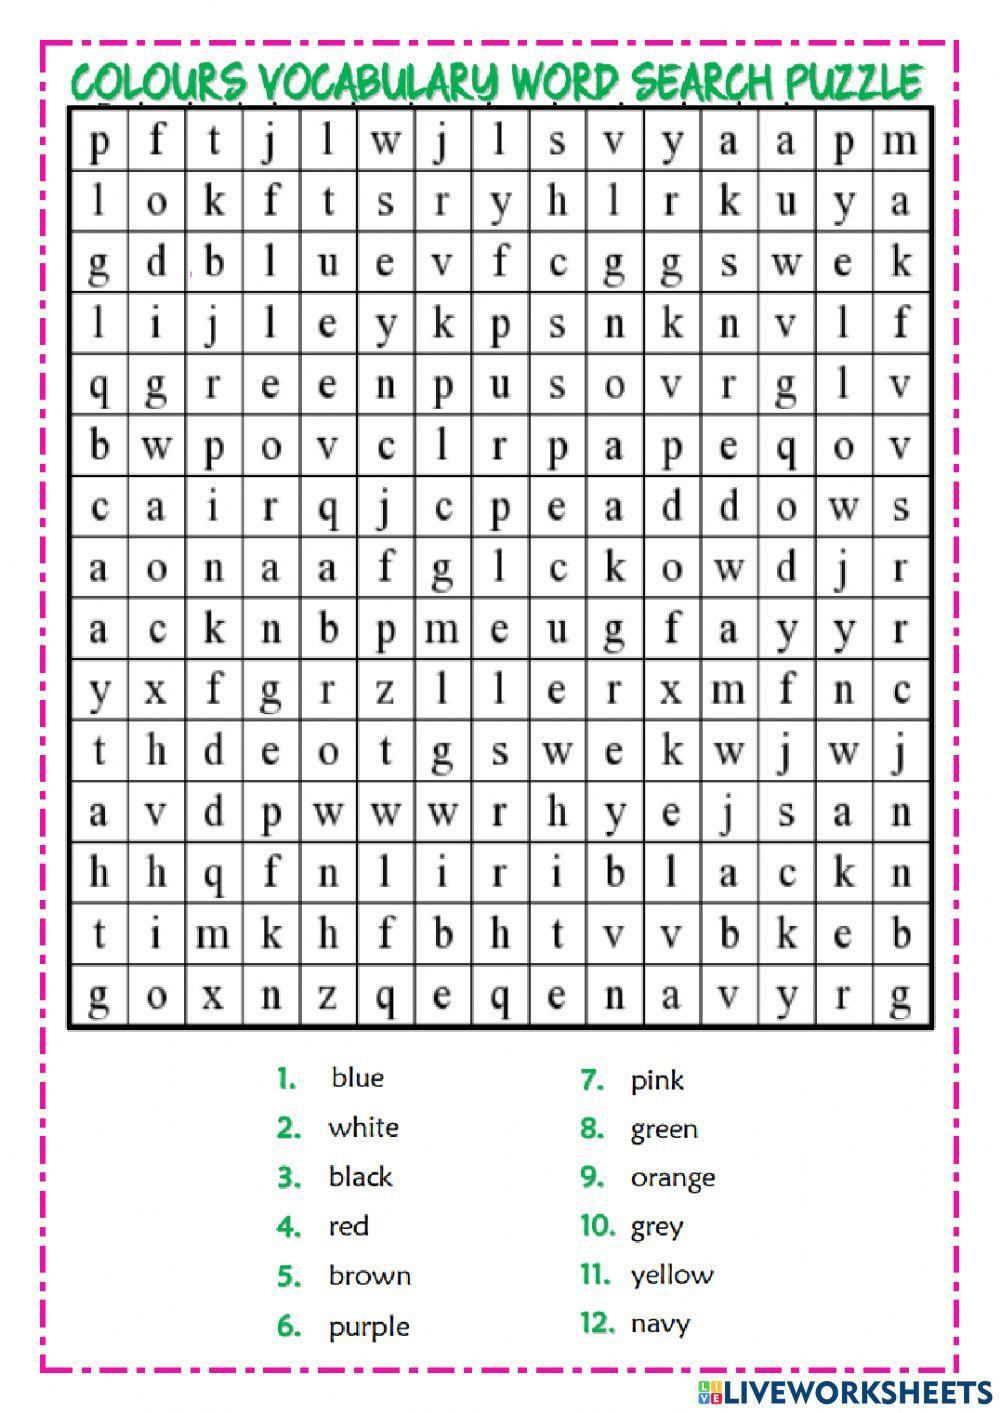 Colours vocabulary word search puzzle